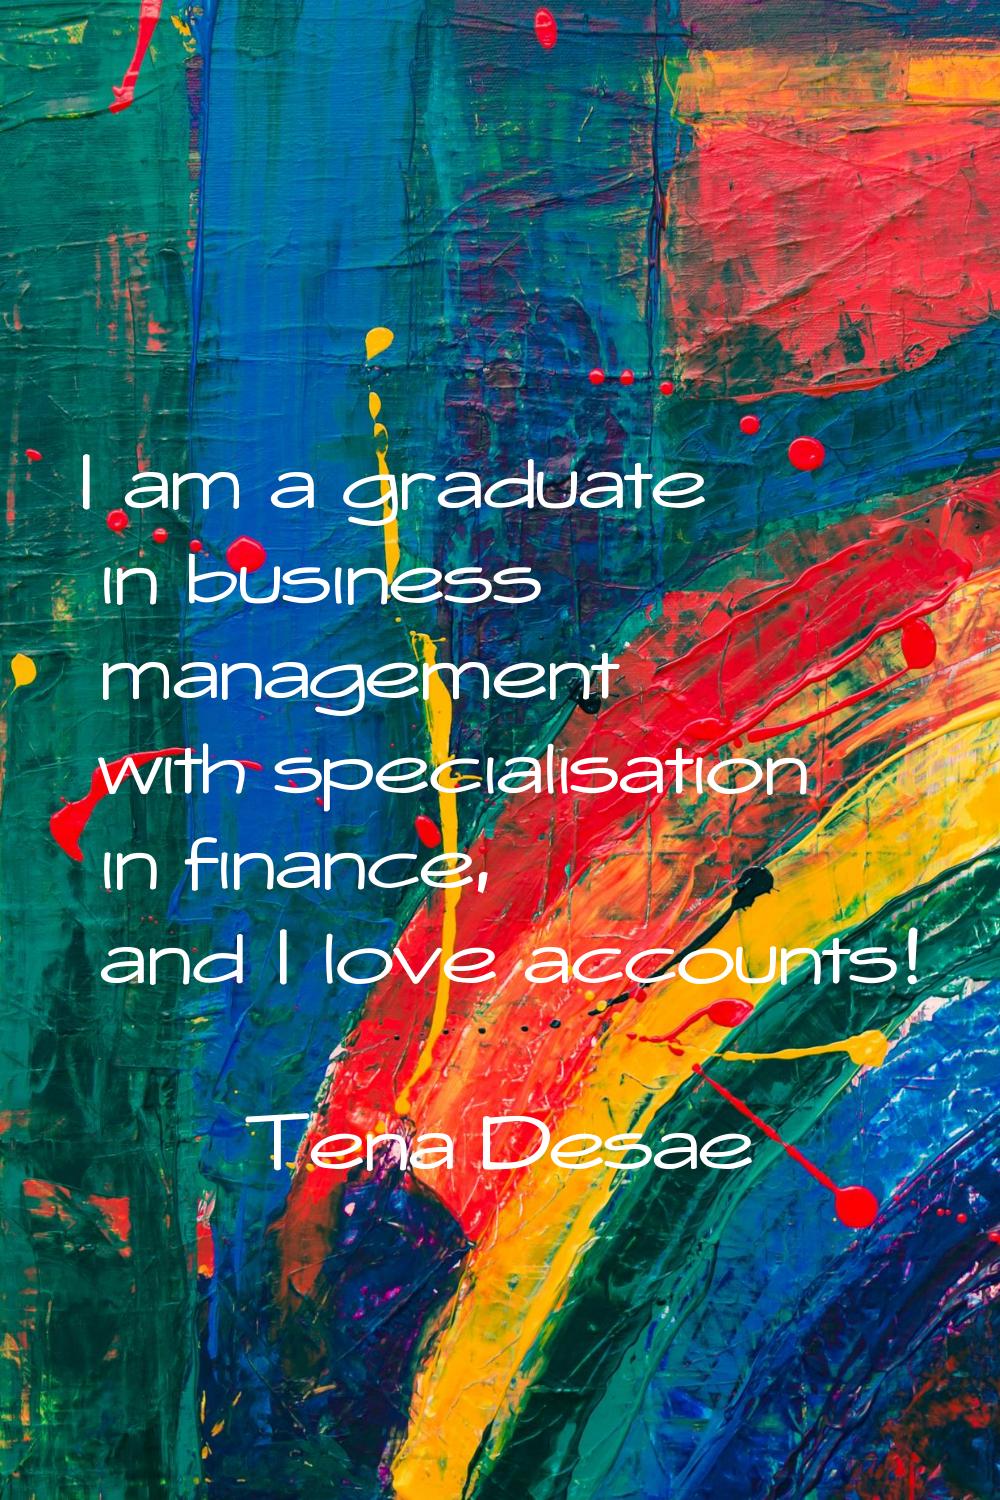 I am a graduate in business management with specialisation in finance, and I love accounts!